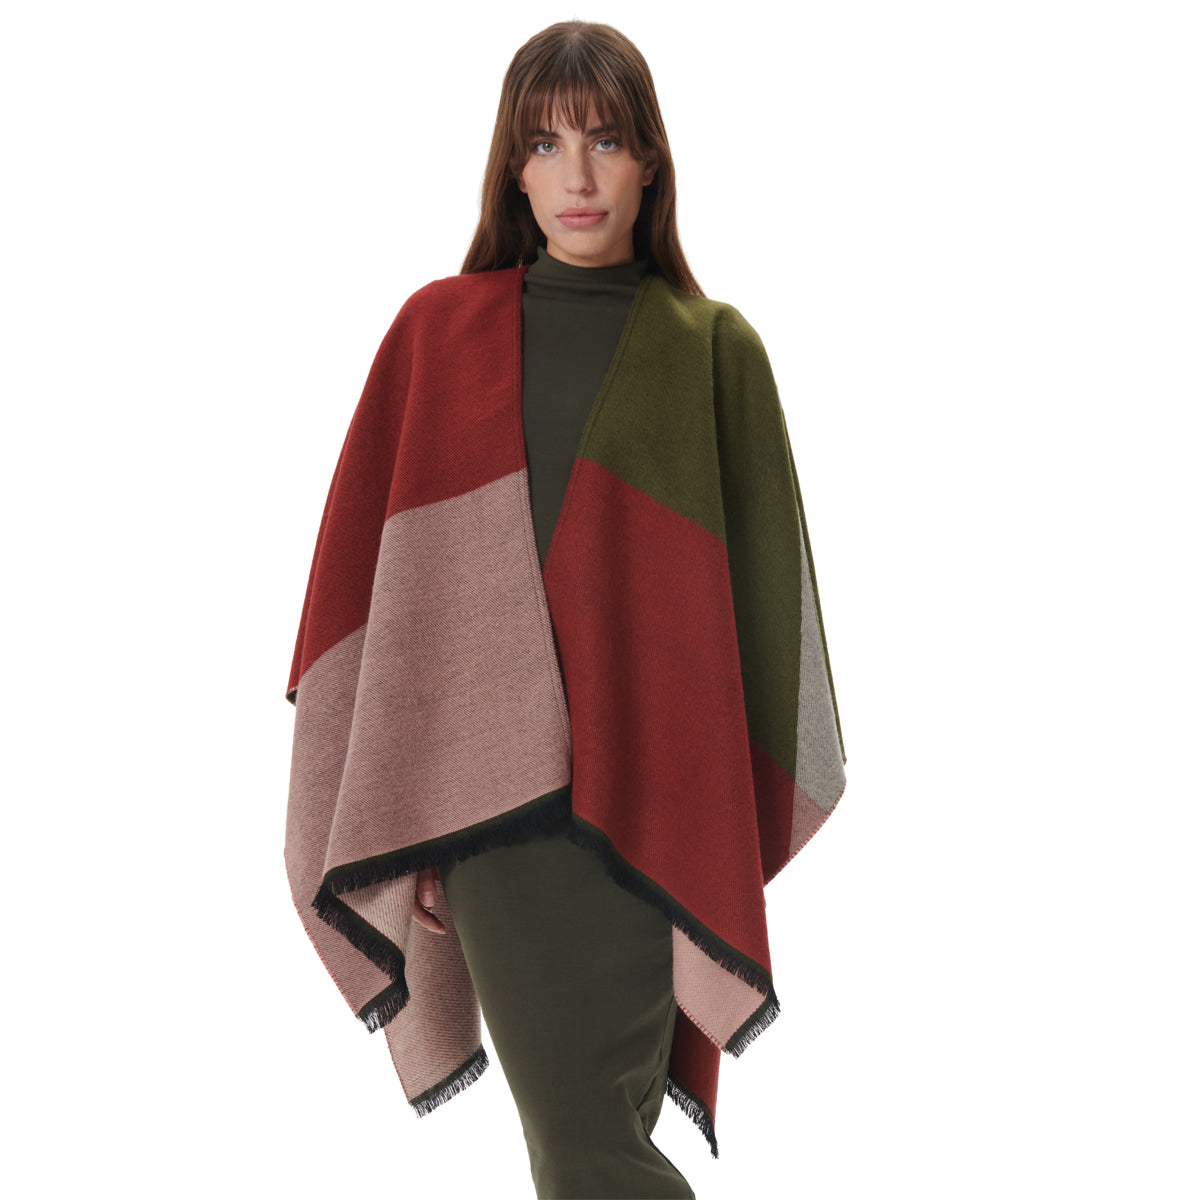 Cape with bow pattern - khaki and spice